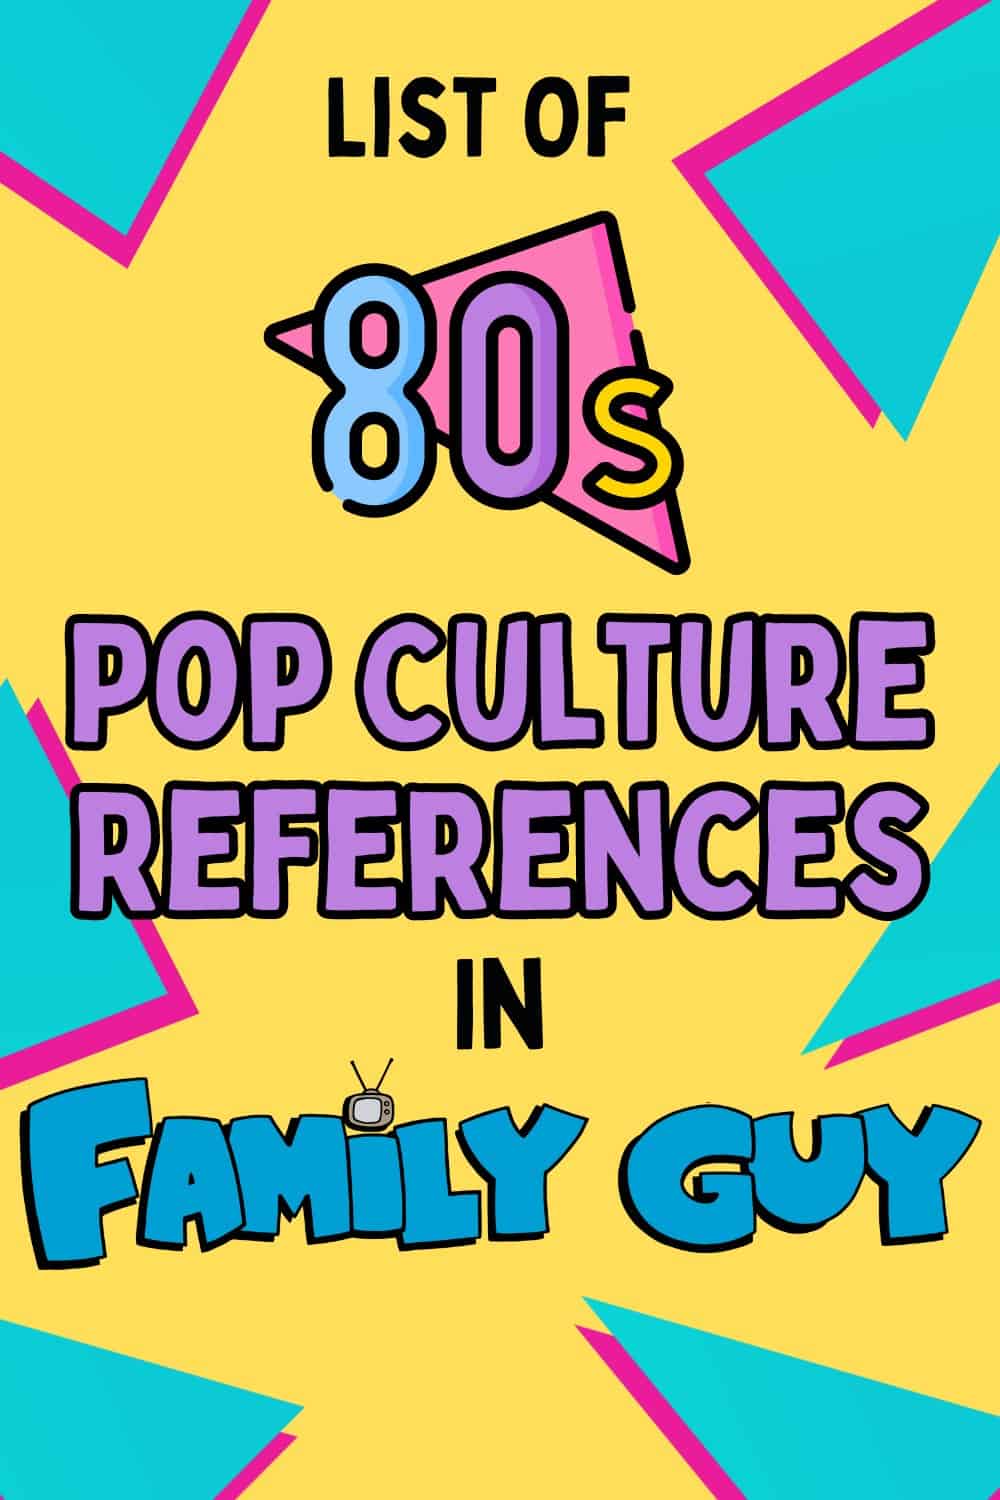 Every time Family Guy Referenced 1980s Pop Culture